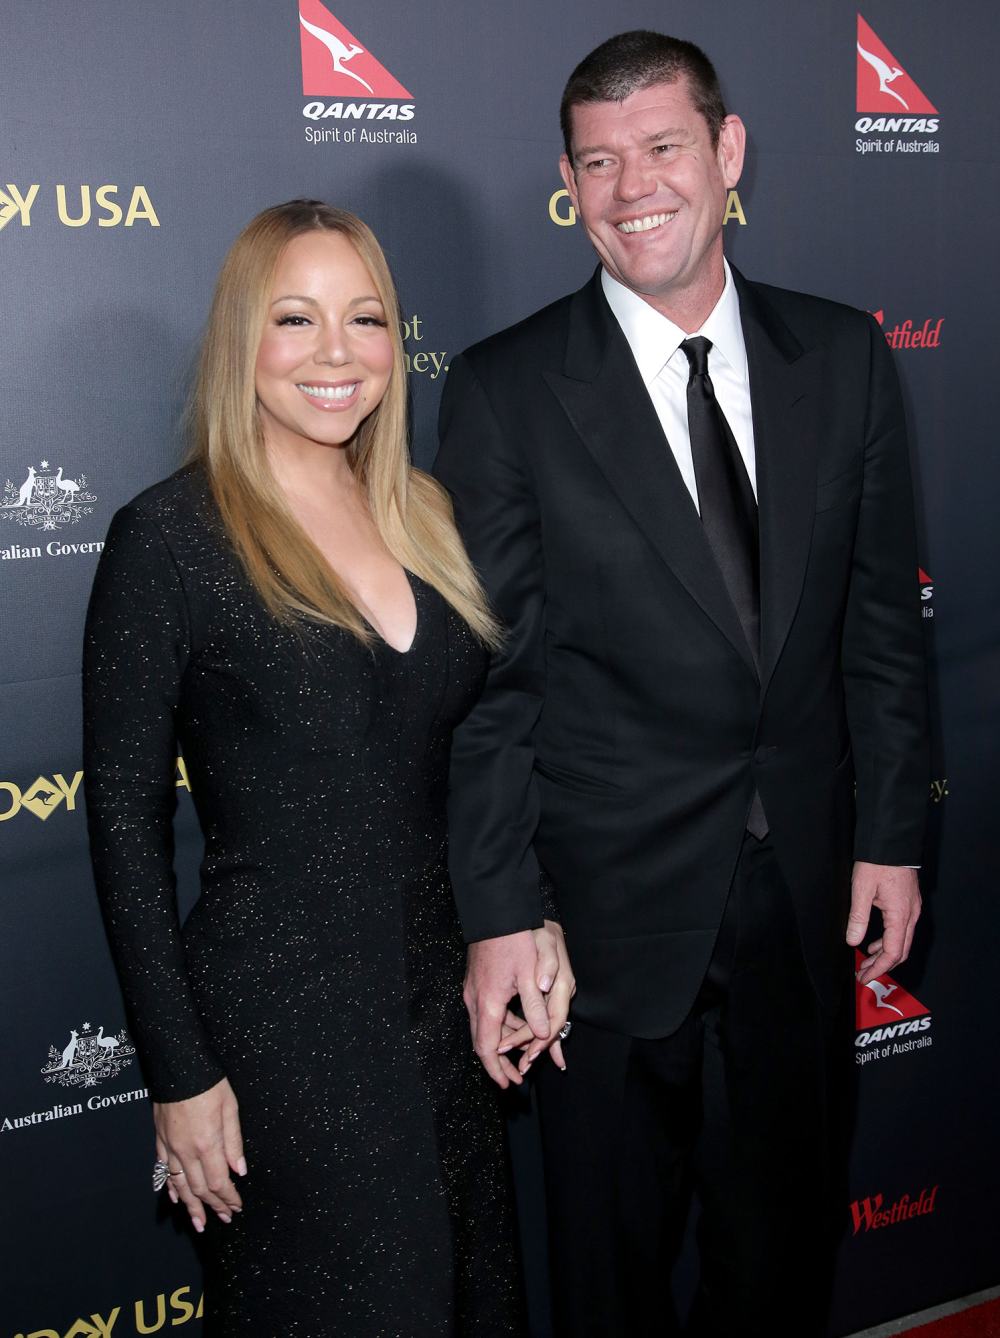 Mariah Carey Reveals Why She Did Not Include Rocky Engagement to James Packer in Her Memoir